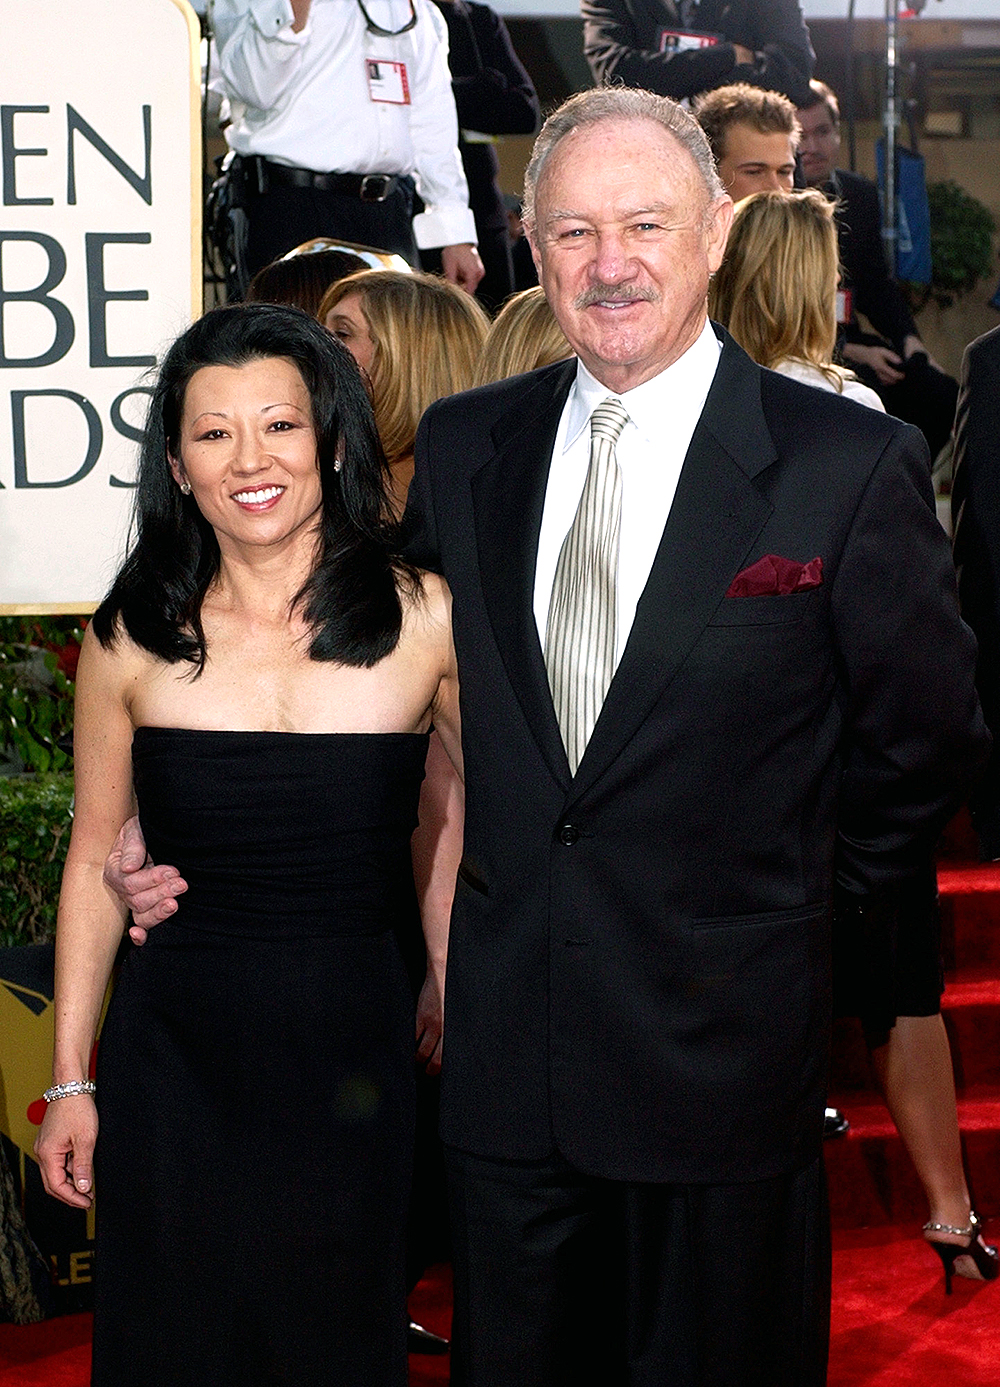 HACKMAN ARAKAWA Actor Gene Hackman arrives with his wife, Betsy Arakawa, for the 60th Annual Golden Globe Awards in Beverly Hills, Calif., where he will receive the Hollywood Foreign Press Association's Cecil B deMille Award for Outstanding Contributions to world of entertainmentGOLDEN GLOBES, BEVERLY HILLS, USA